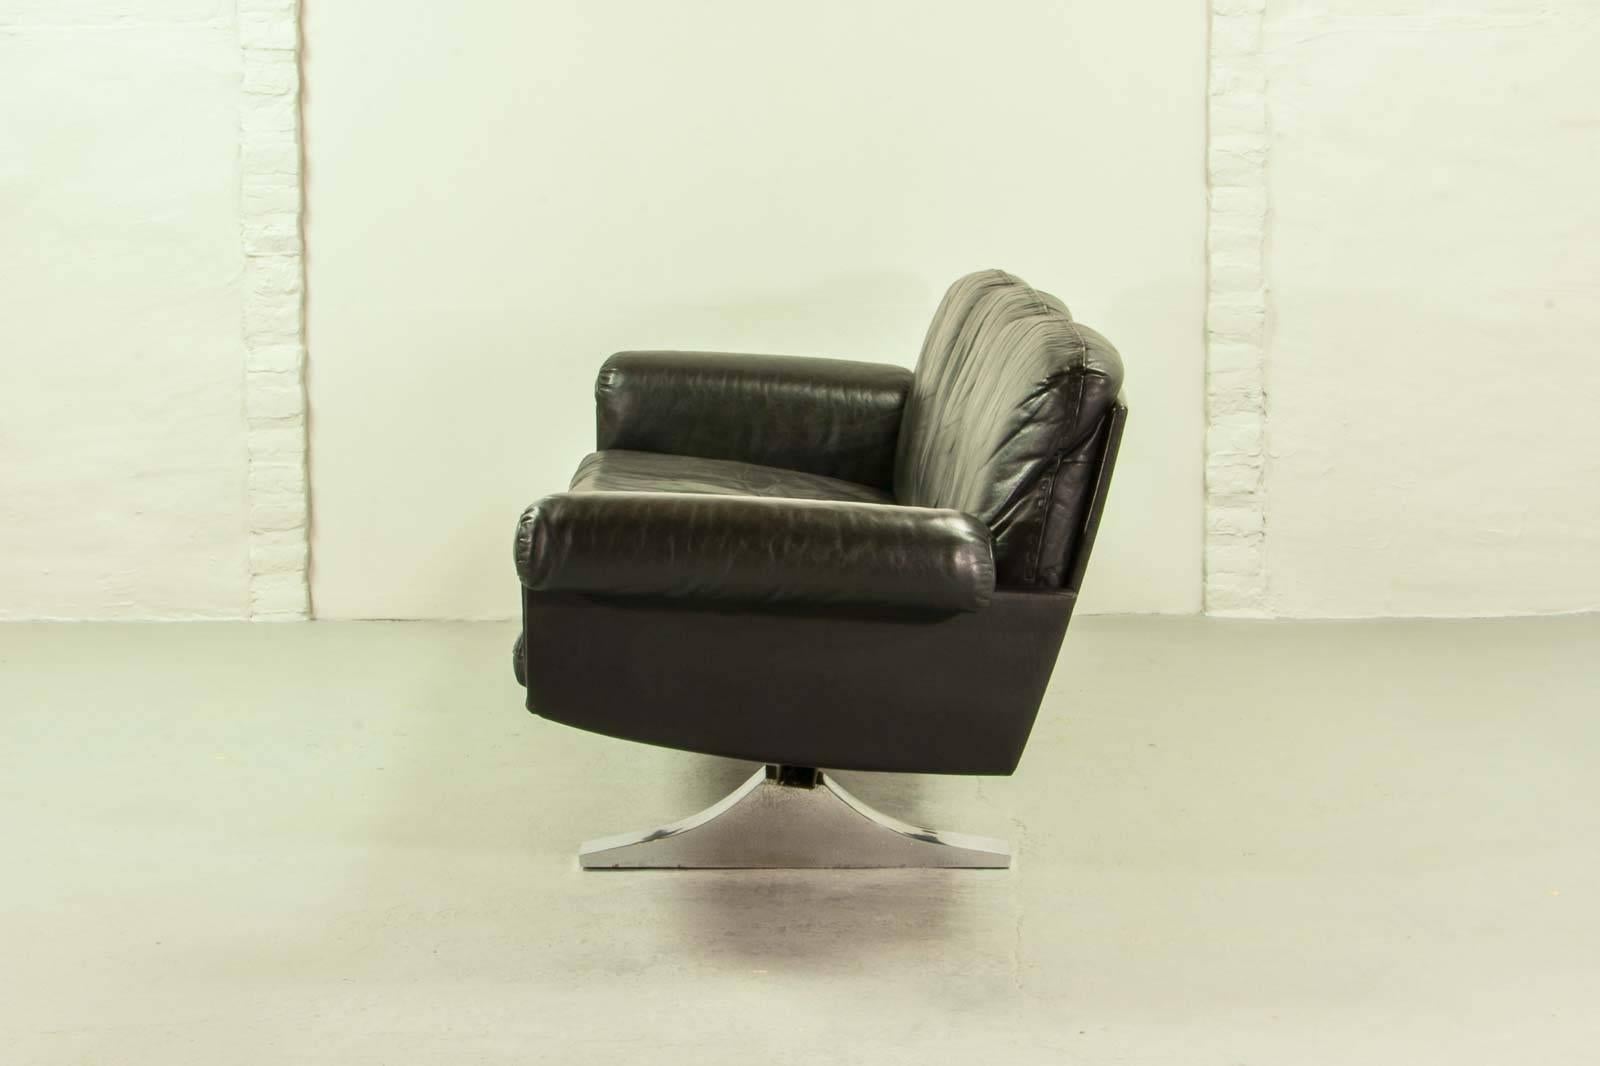 Swiss Mid-Century Black Leather Three-Seat Sofa DS35 by De Sede, 1960s